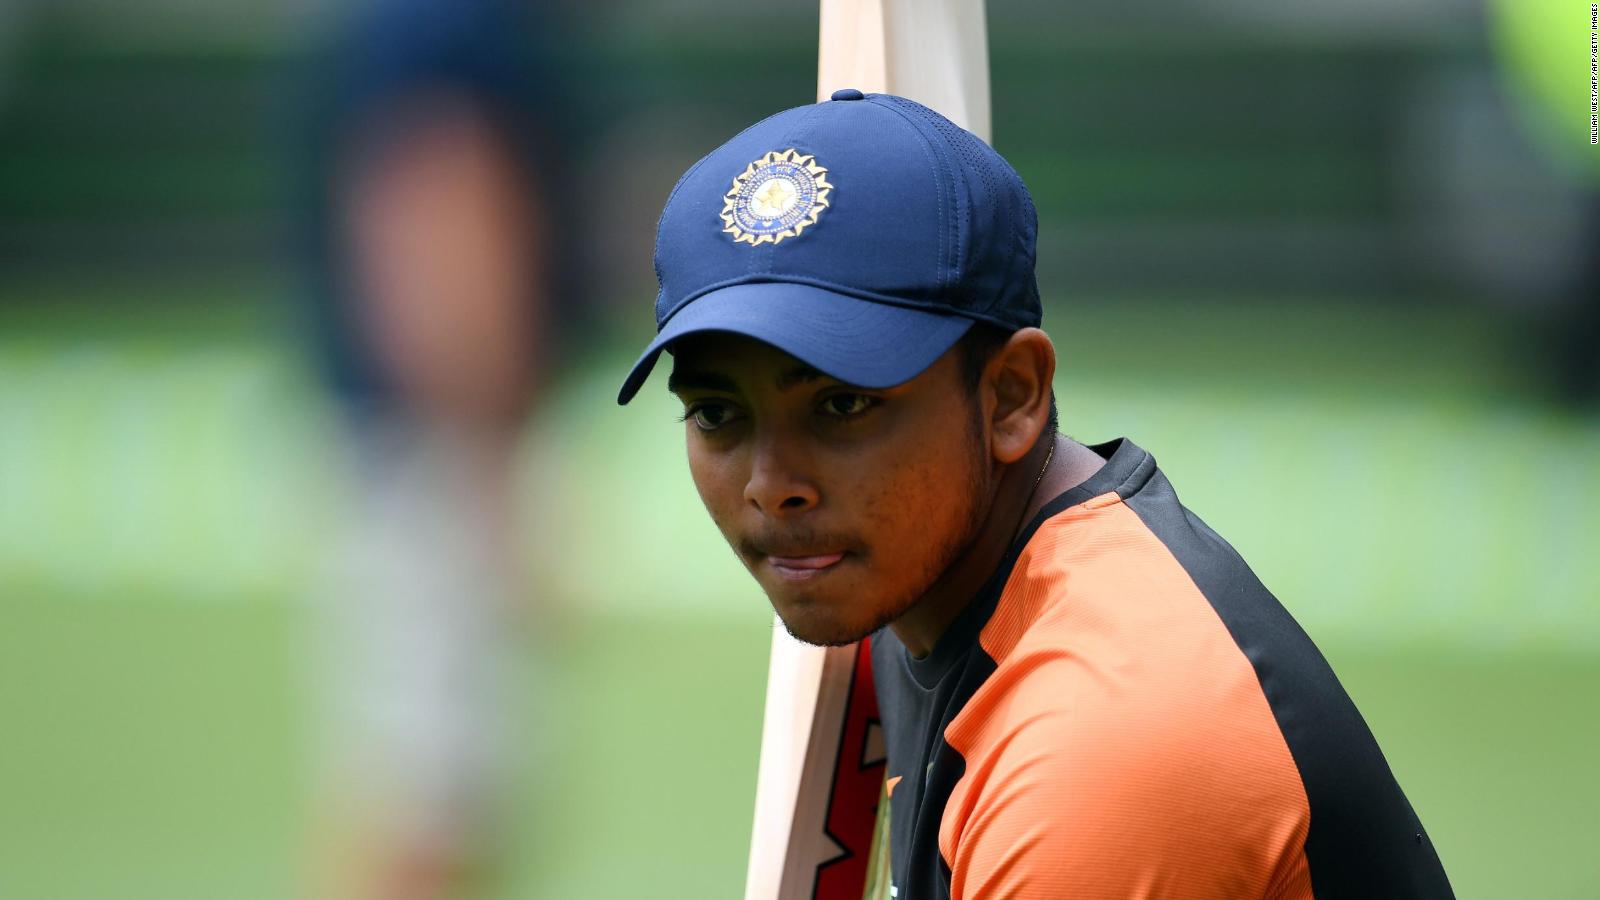 Prithvi Shaw suspended from cricket after doping violation CNN